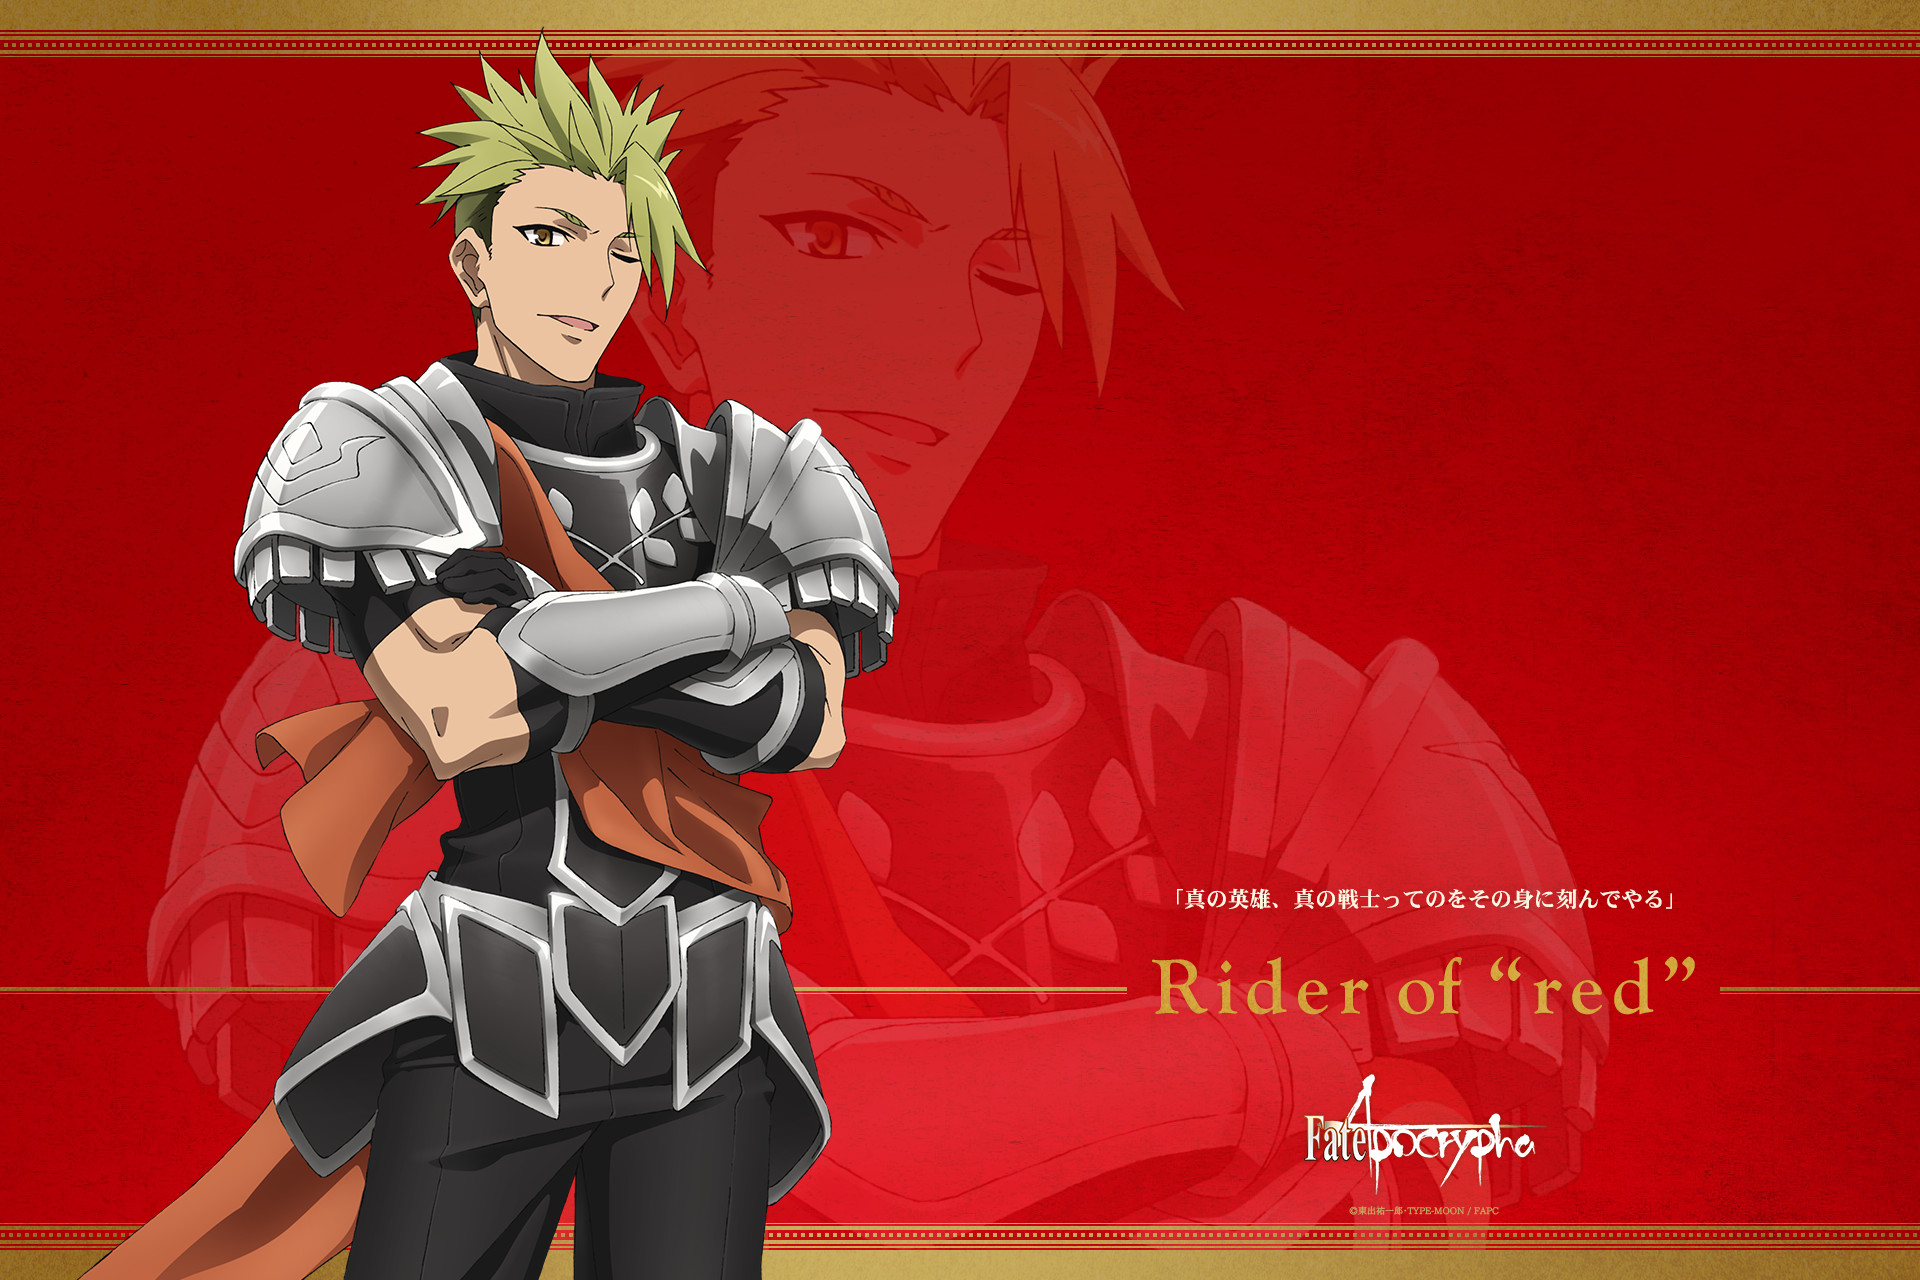 Rider Of Red Fate Apocrypha 1920x1280